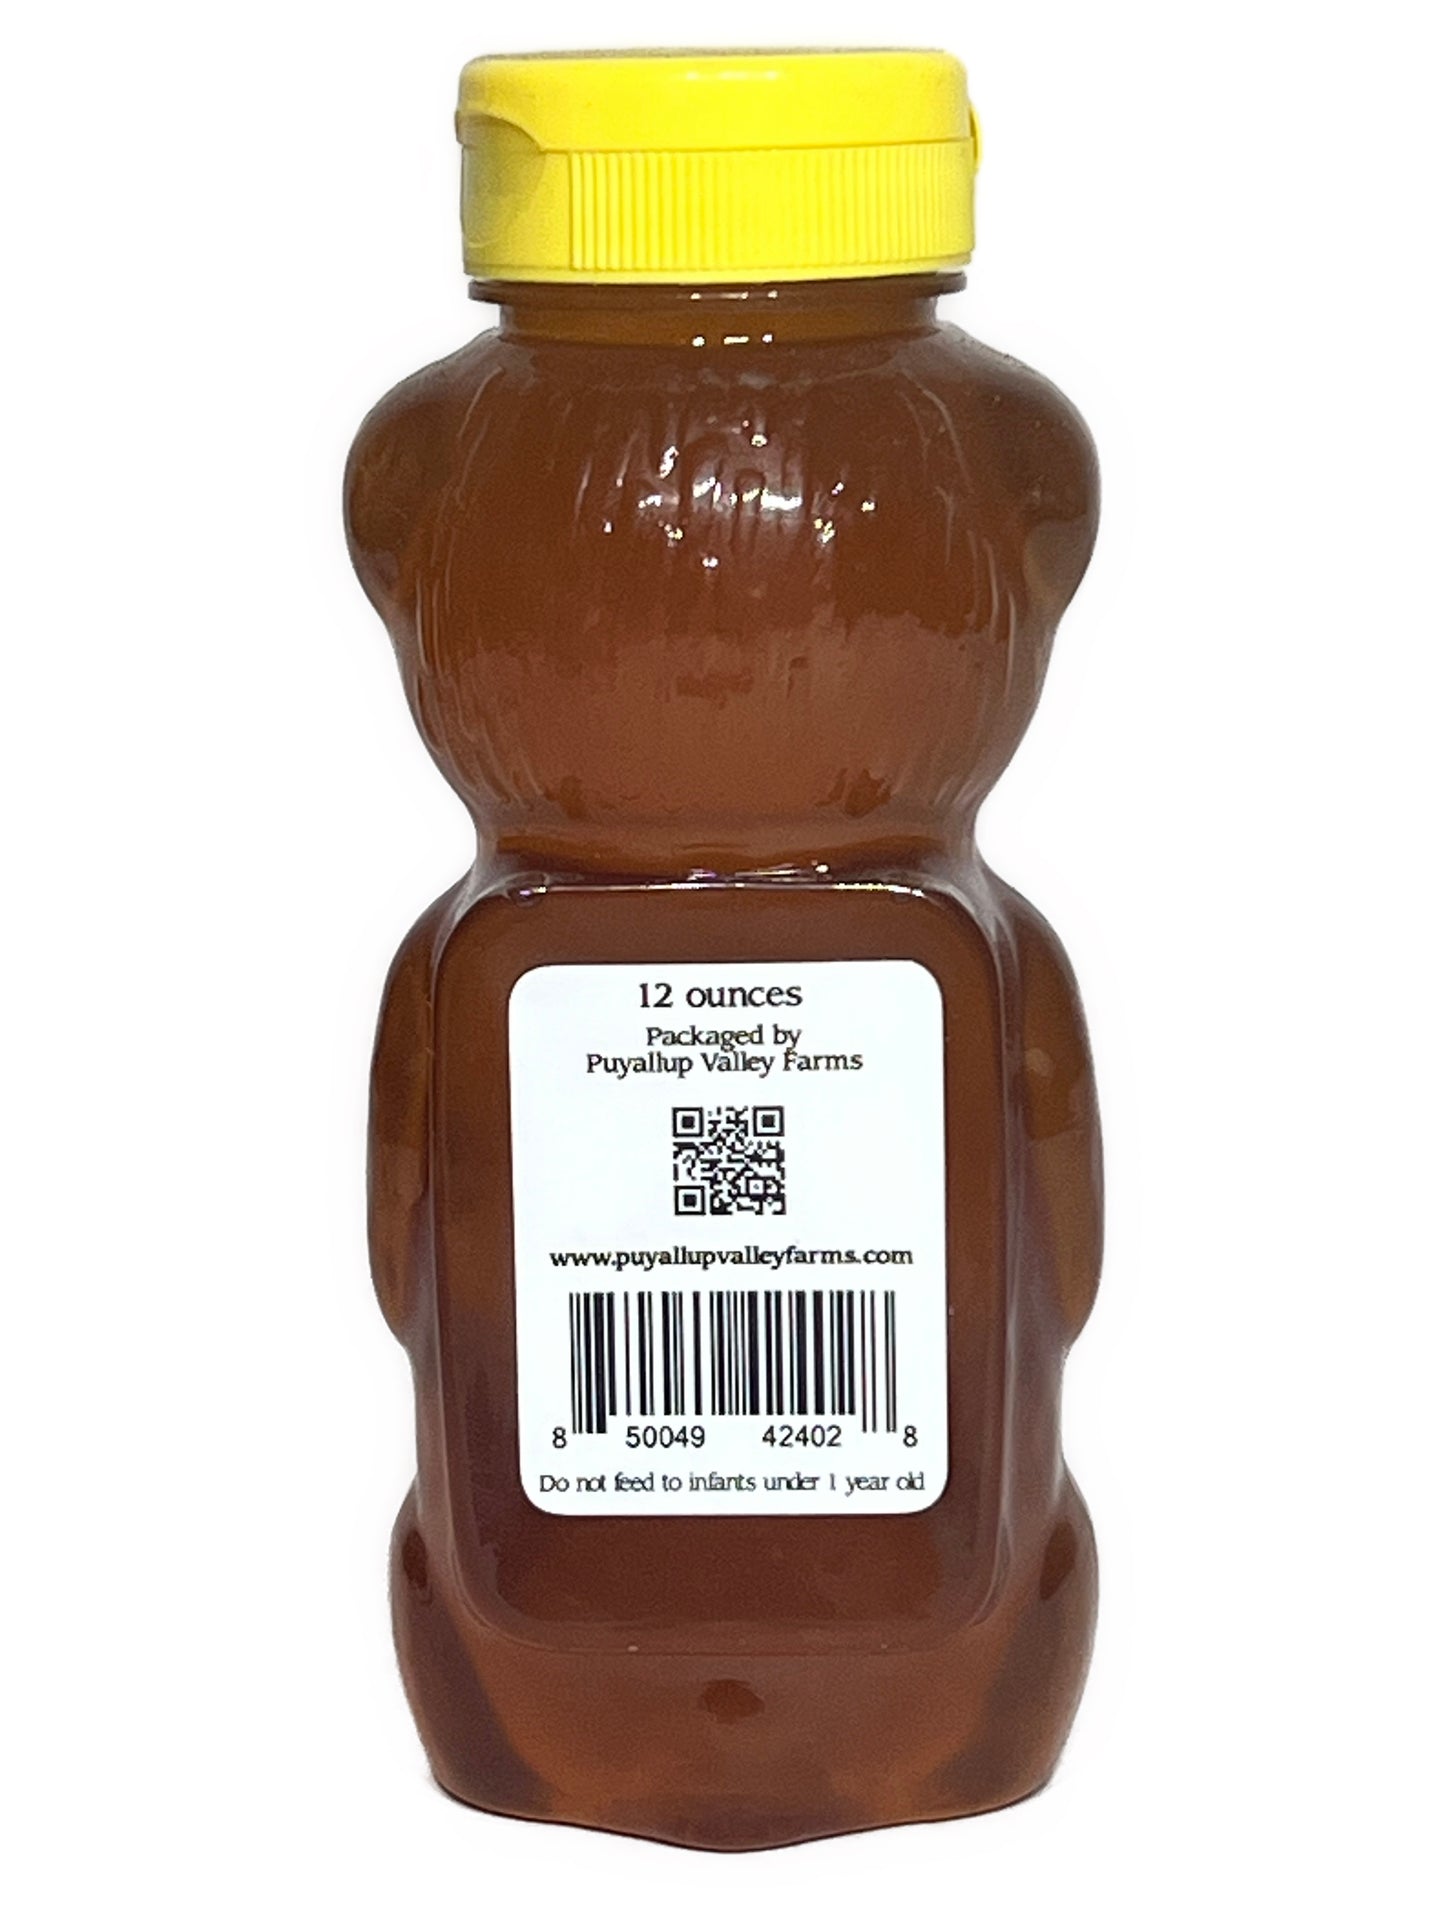 Blueberry Raw Honey by Puyallup Valley Farms Organic Unfiltered Raw Honey All Natural Sweetener No Additives Non Pasteurized Organic Raw Honey BPA Free Raw Organic Honey Bear Squeeze Bottle No Drip Cap FREE SHIPPING Blueberries 12 Oz.